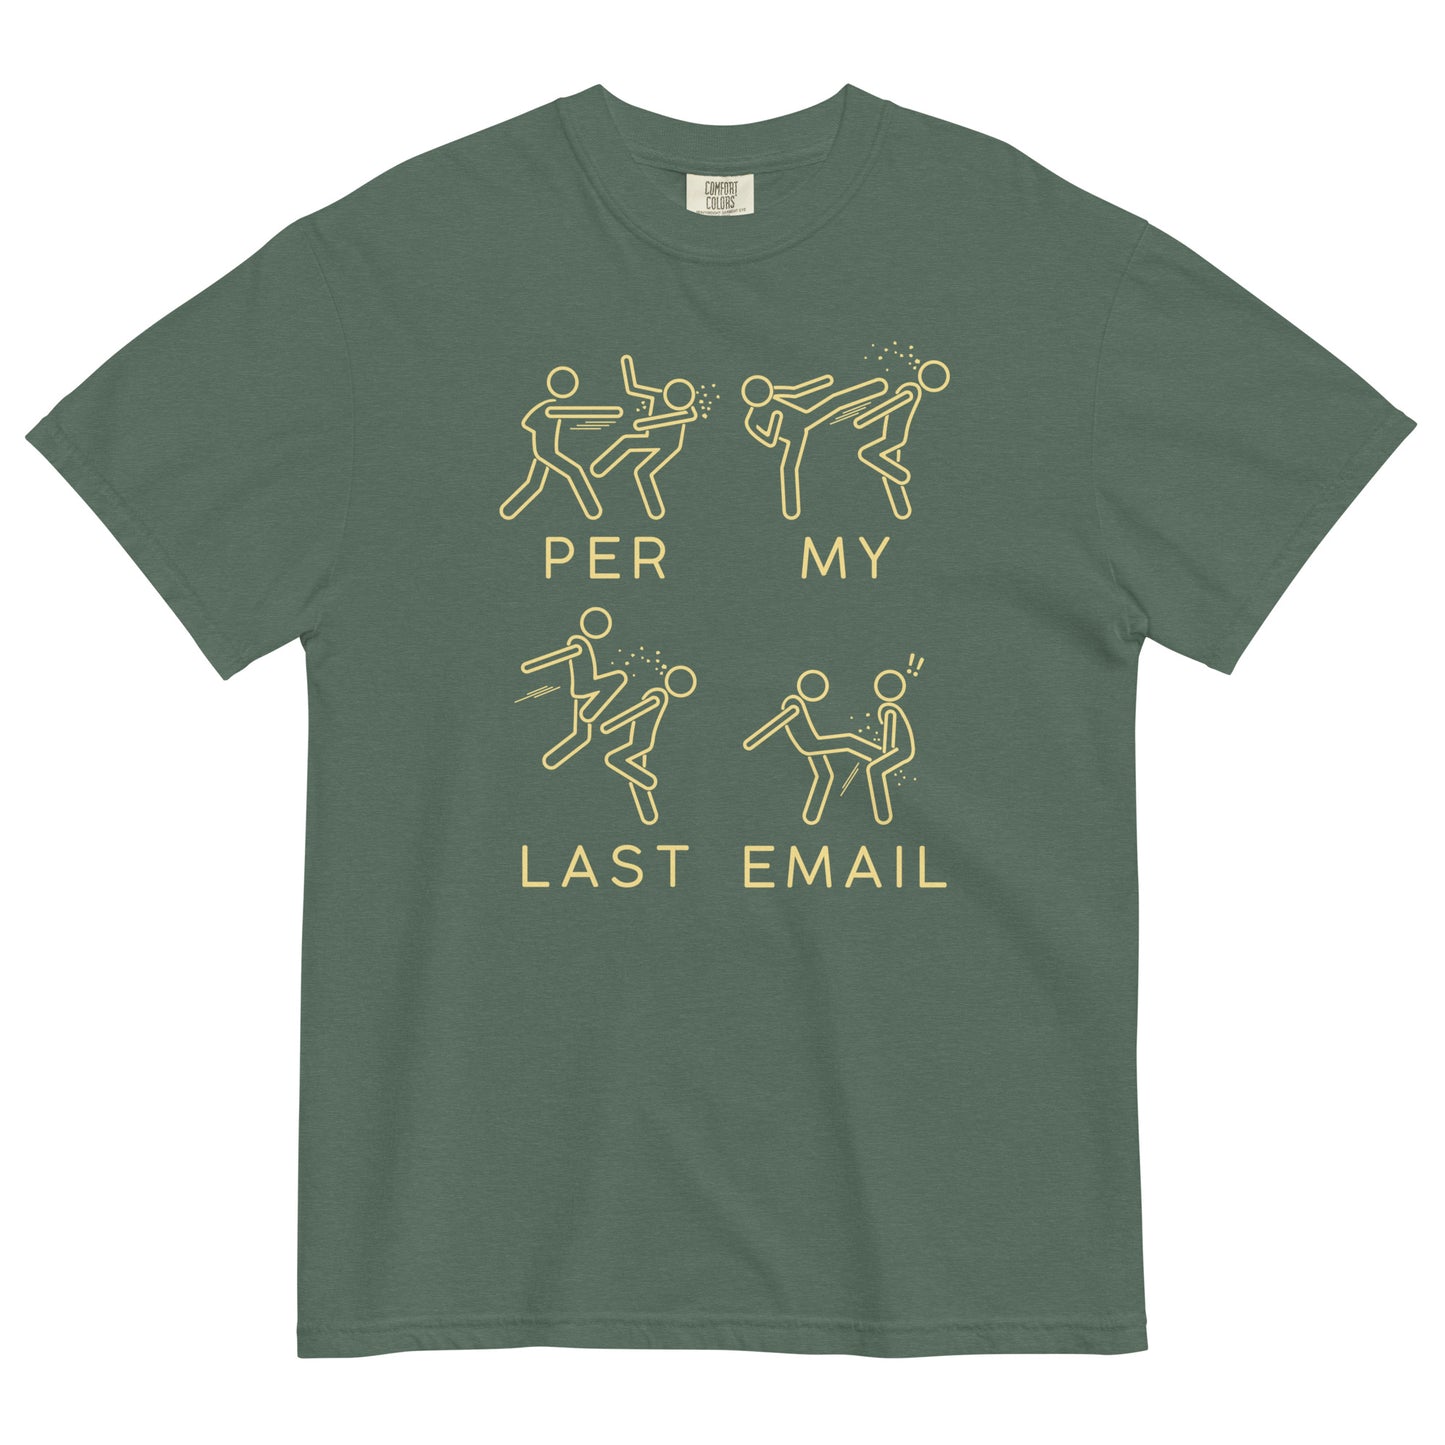 Per My Last Email Men's Relaxed Fit Tee